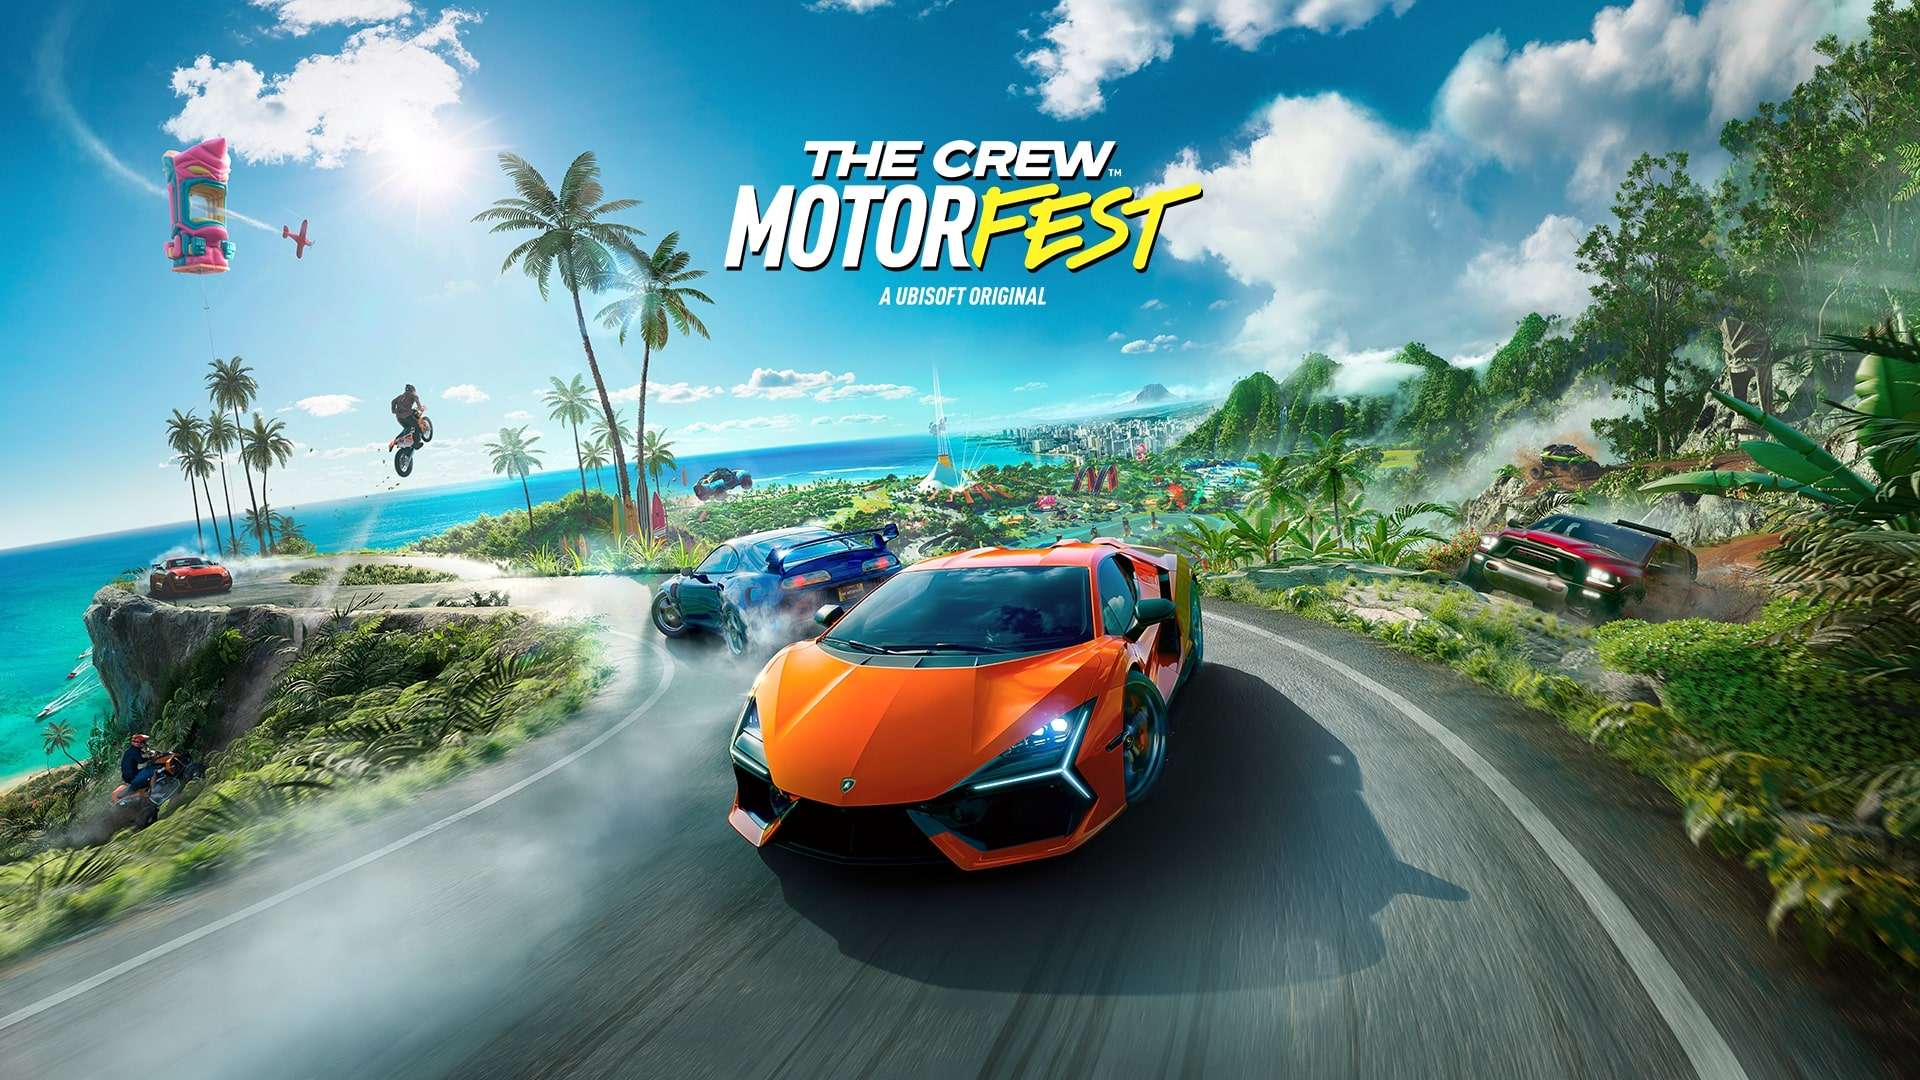 A Lamborghini leads other cars in a race in Hawaii in The Crew Motorfest